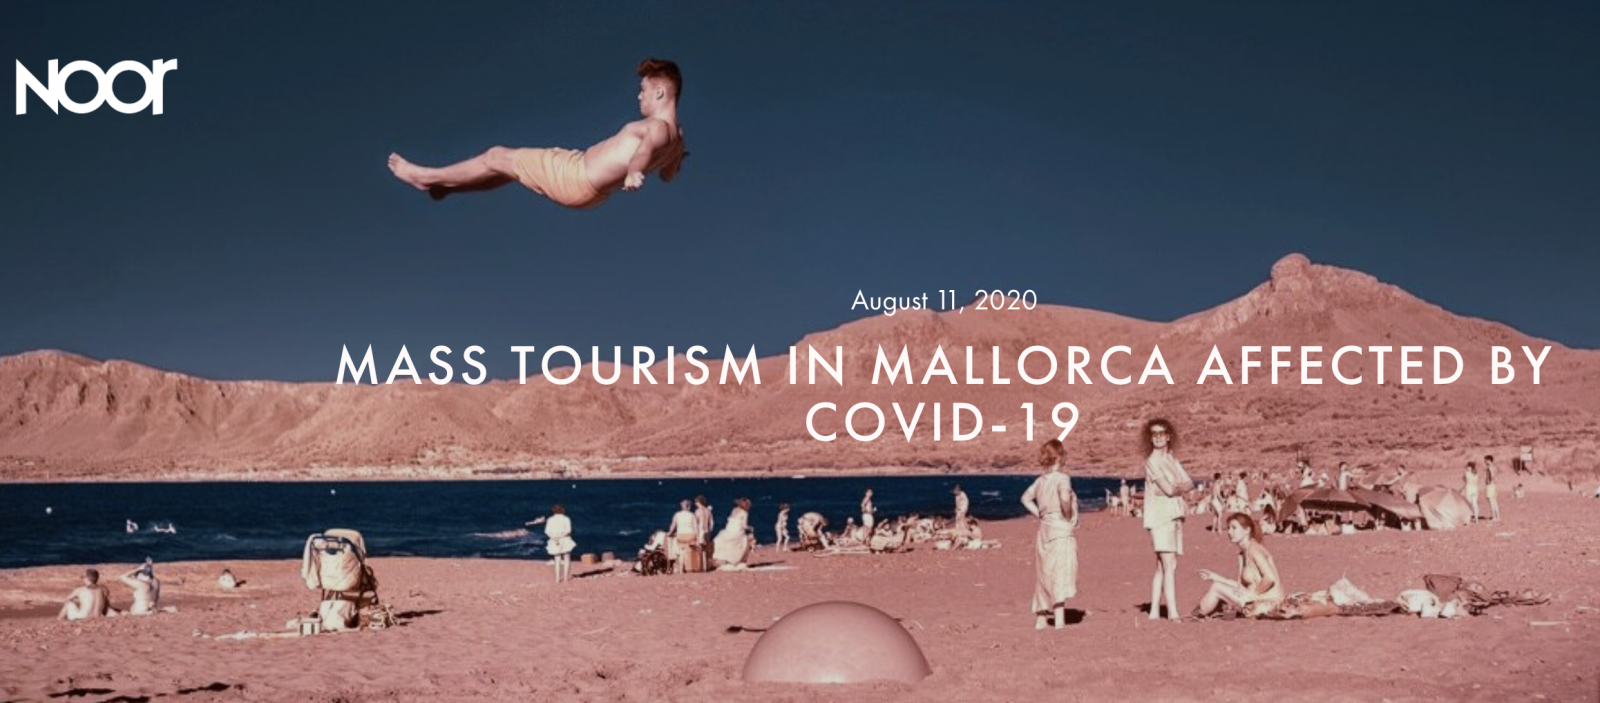 on NatGeo: MASS TOURISM IN MALLORCA AFFECTED BY COVID-19